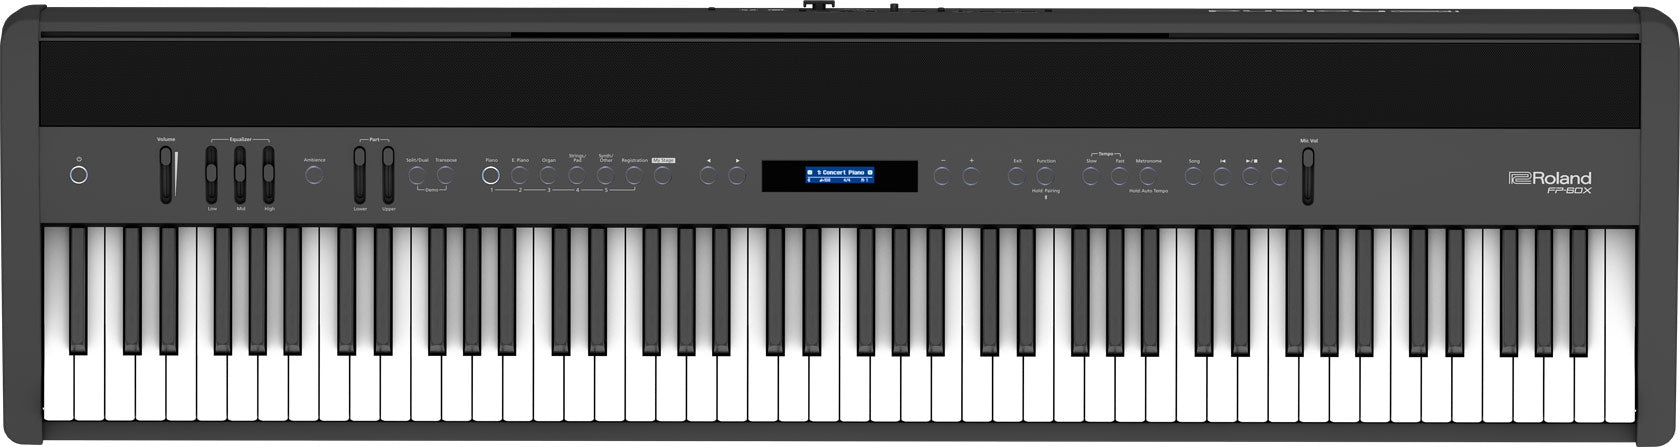 Roland FP-60X 88-key Digital Piano Musician Package with RH-5 Headphone and DP-10 Pedal - Black (FP60X / FP 60X) - Music Bliss Malaysia